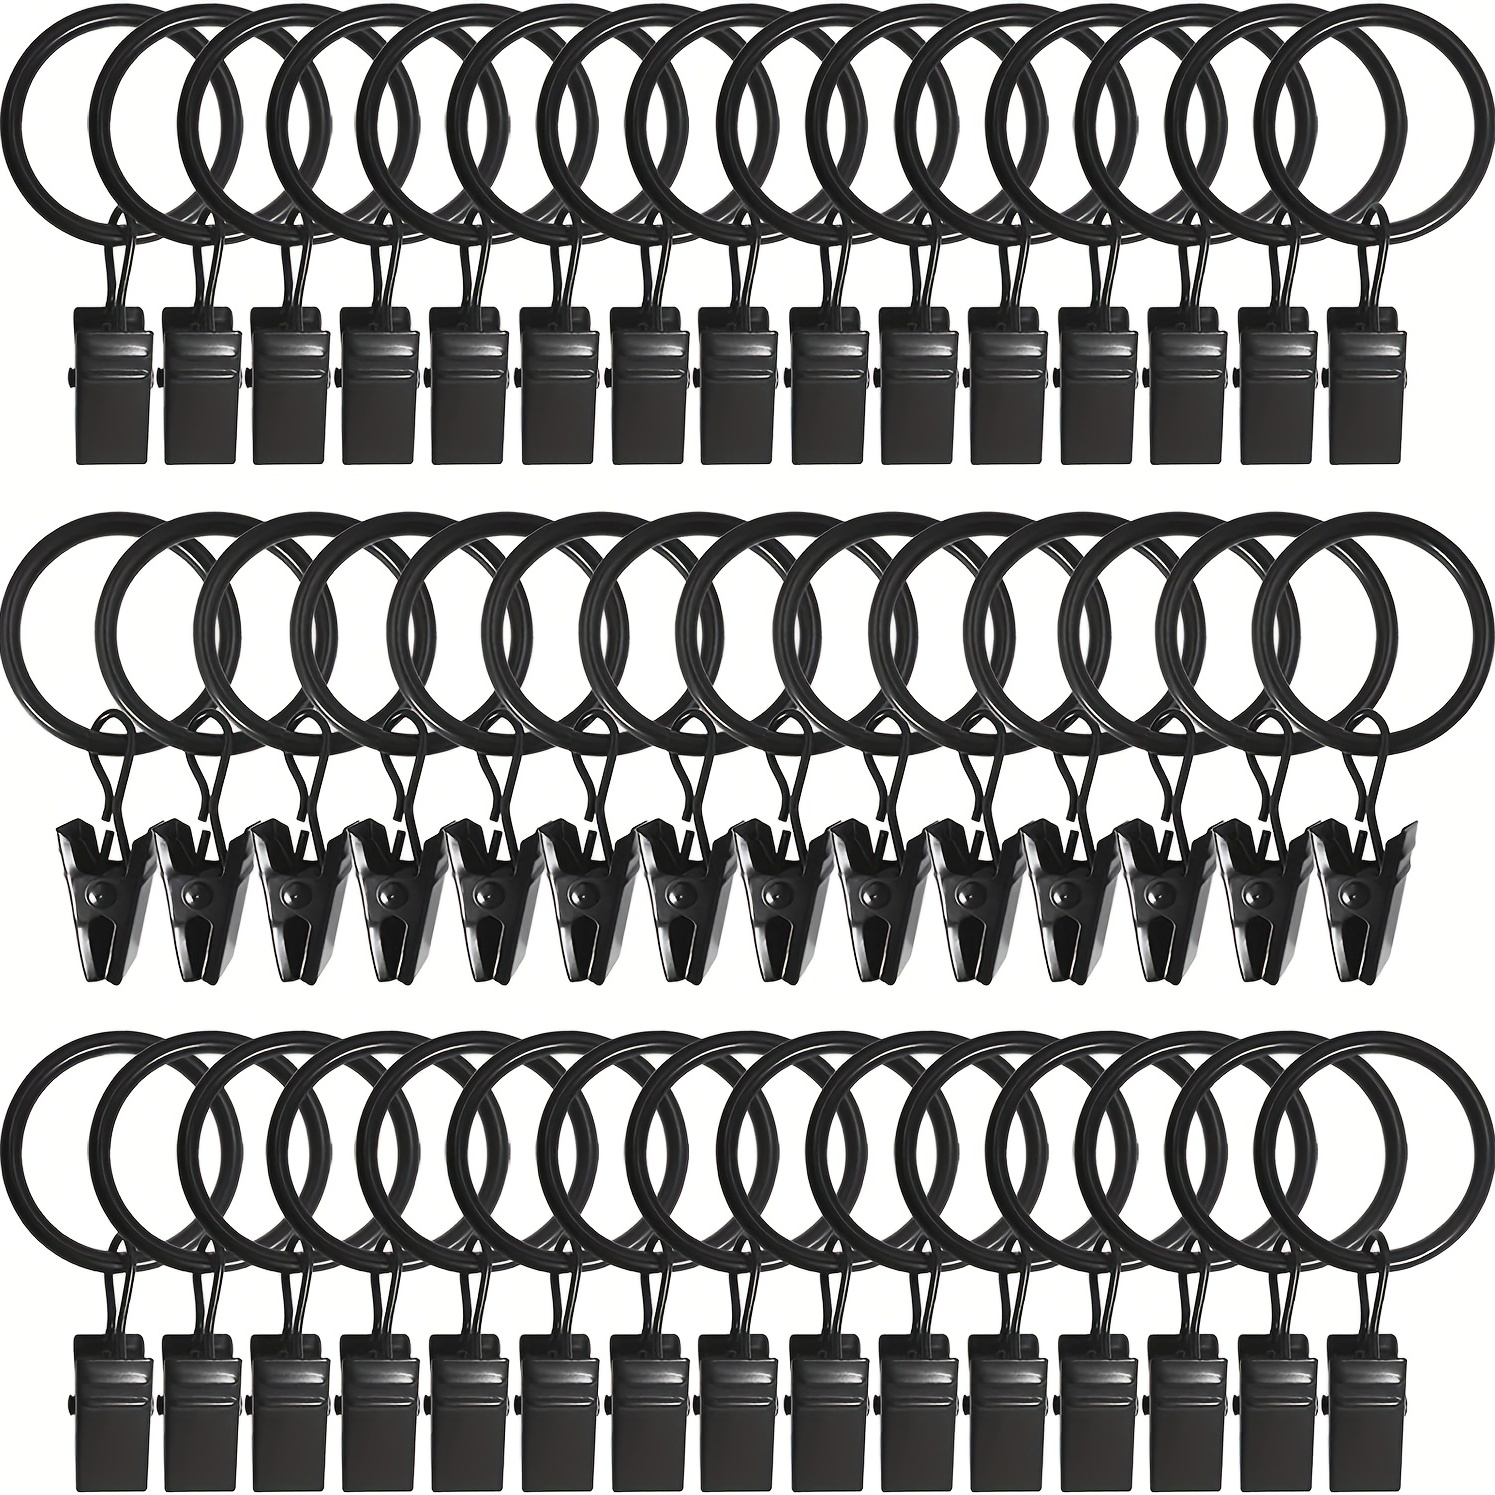 LLPJS 44pcs Curtain Rings with Clips, Curtains Hooks Drapery Clip with Ring, Perfect for Decor Drapes Fabric Bows Caps Hangers or Othe Display, Rings